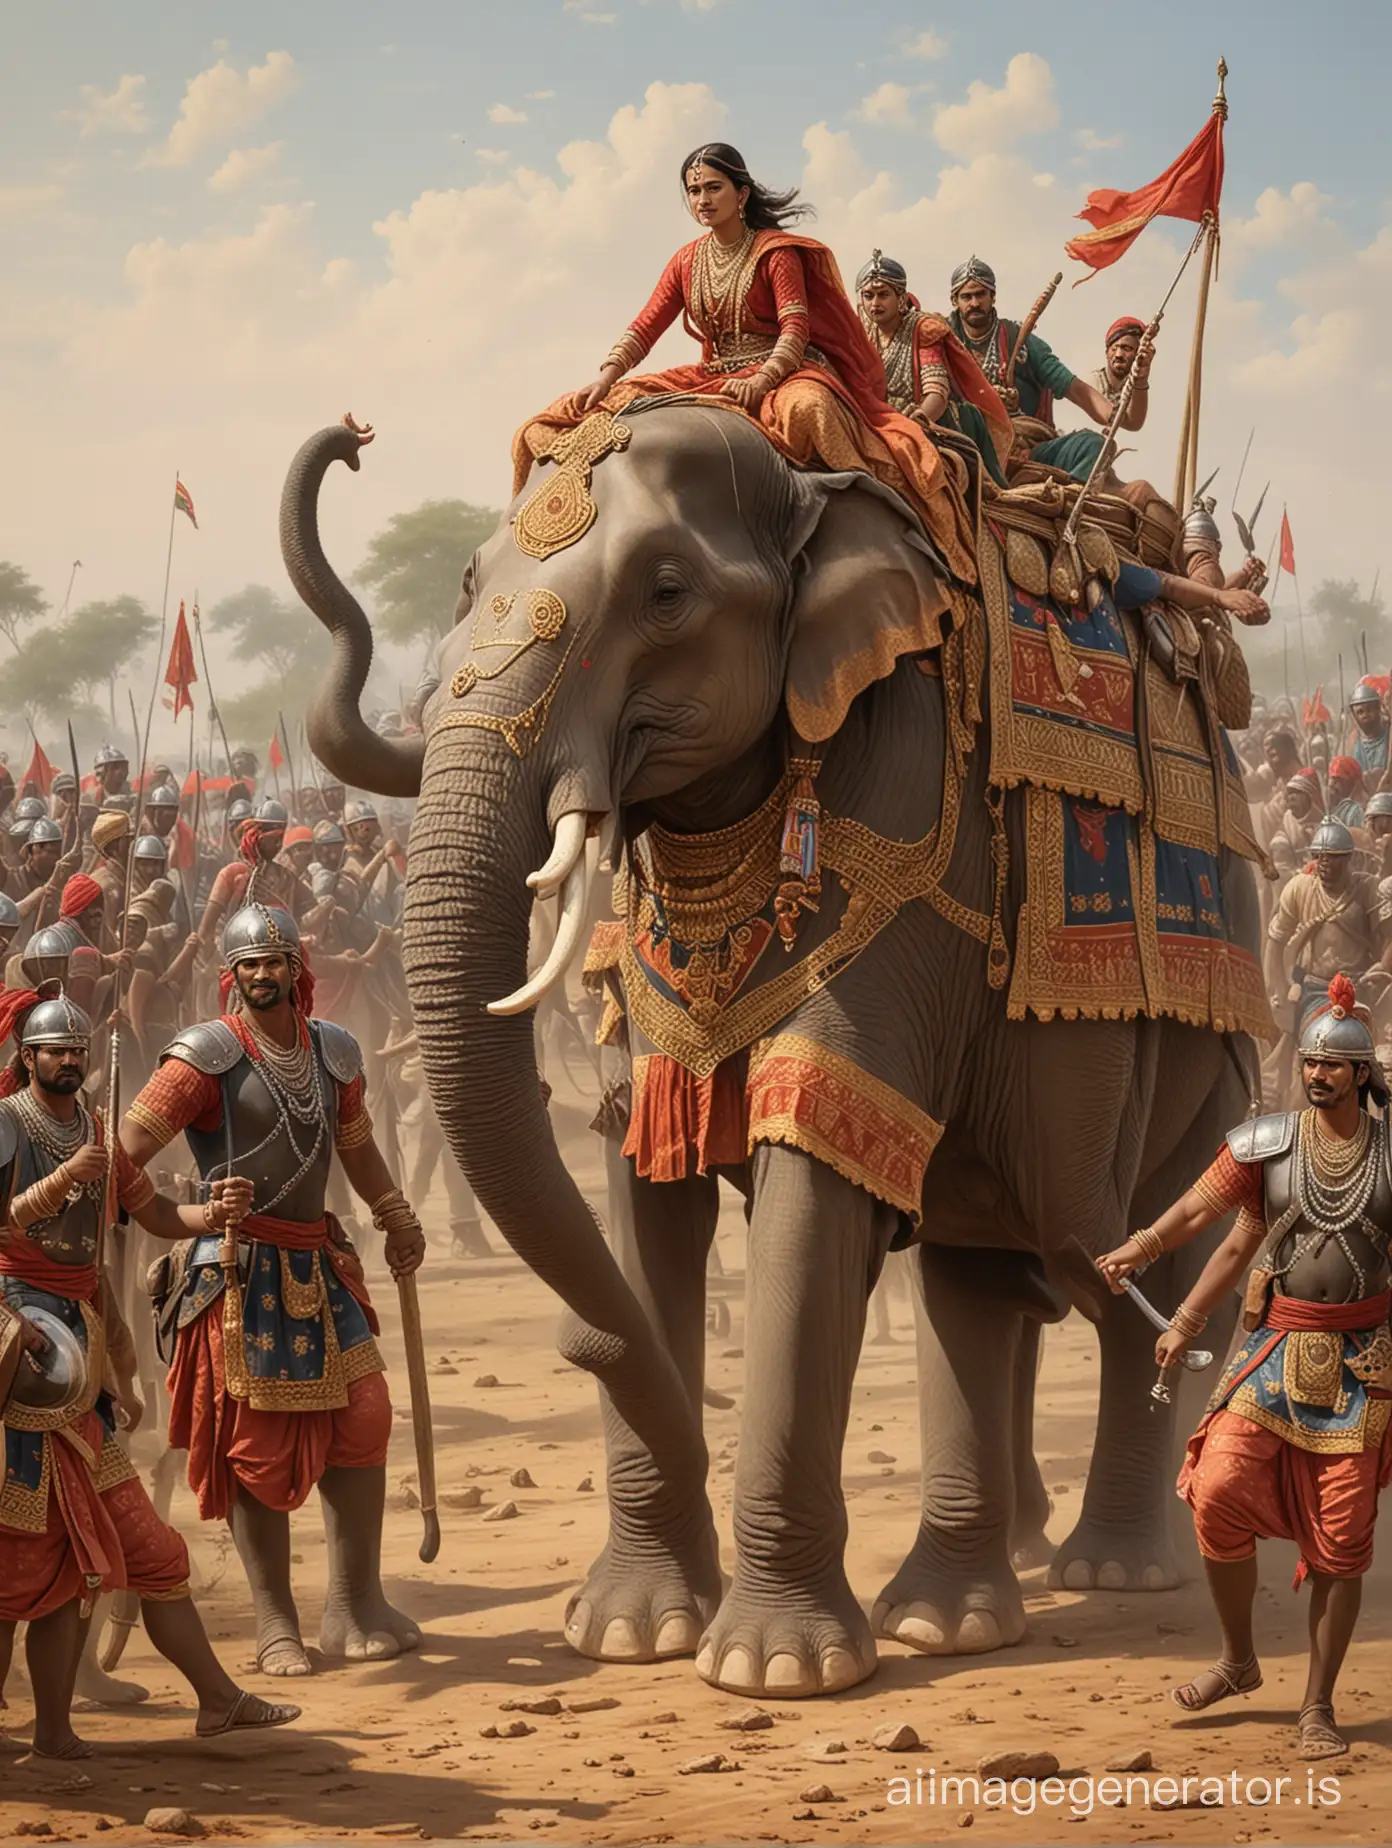 Female worrior  setting on elephant with her foot soldiers in battle field front of Akbar army